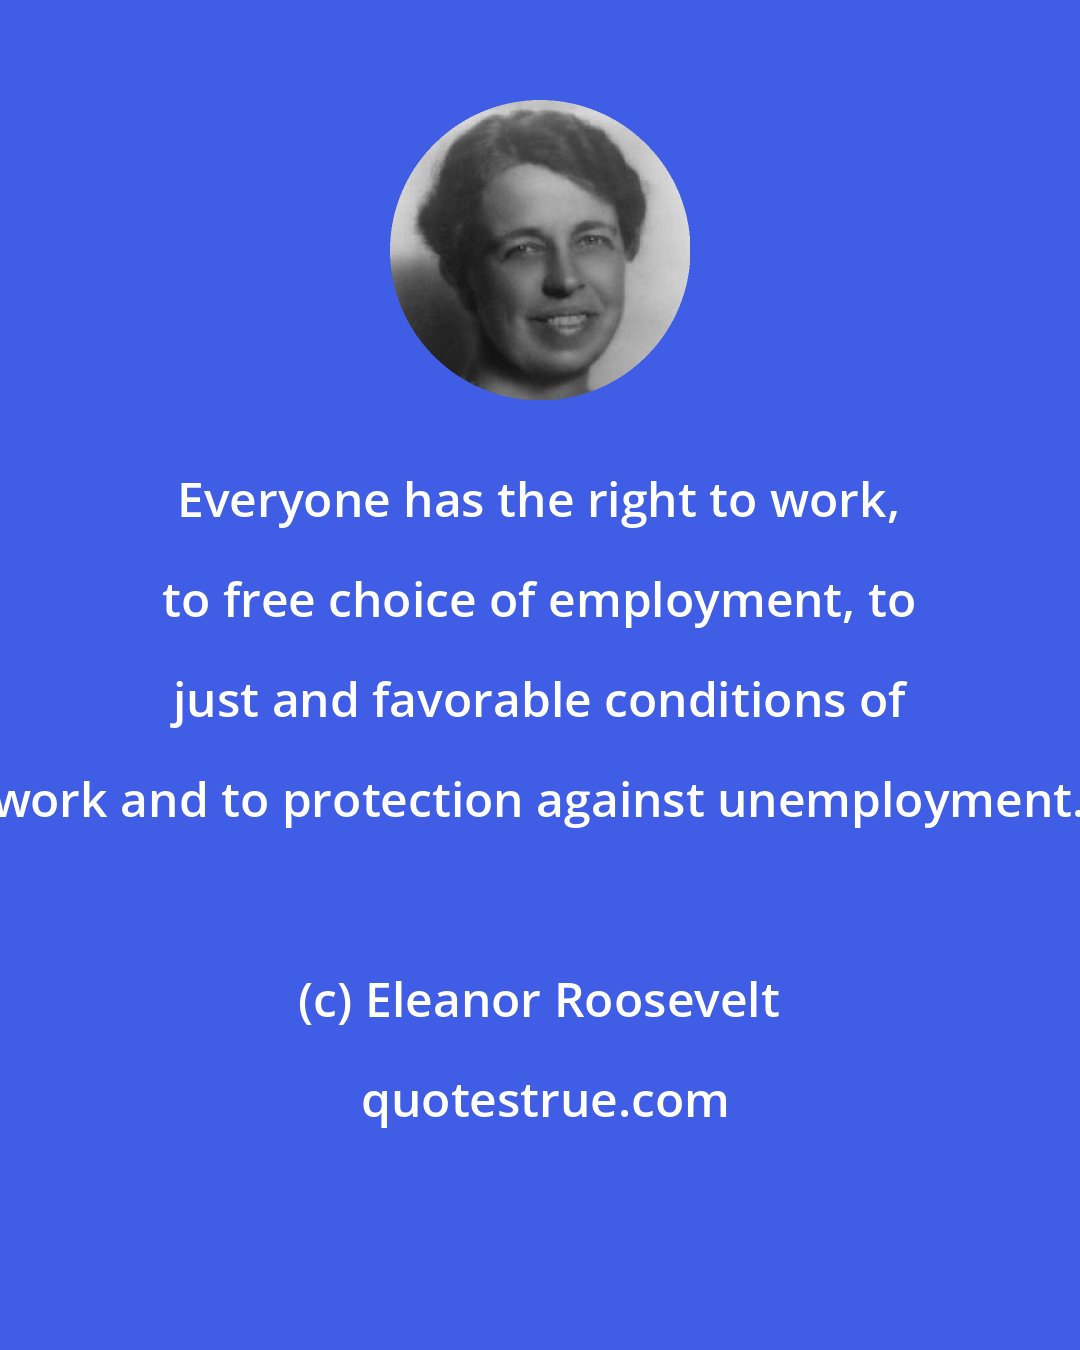 Eleanor Roosevelt: Everyone has the right to work, to free choice of employment, to just and favorable conditions of work and to protection against unemployment.